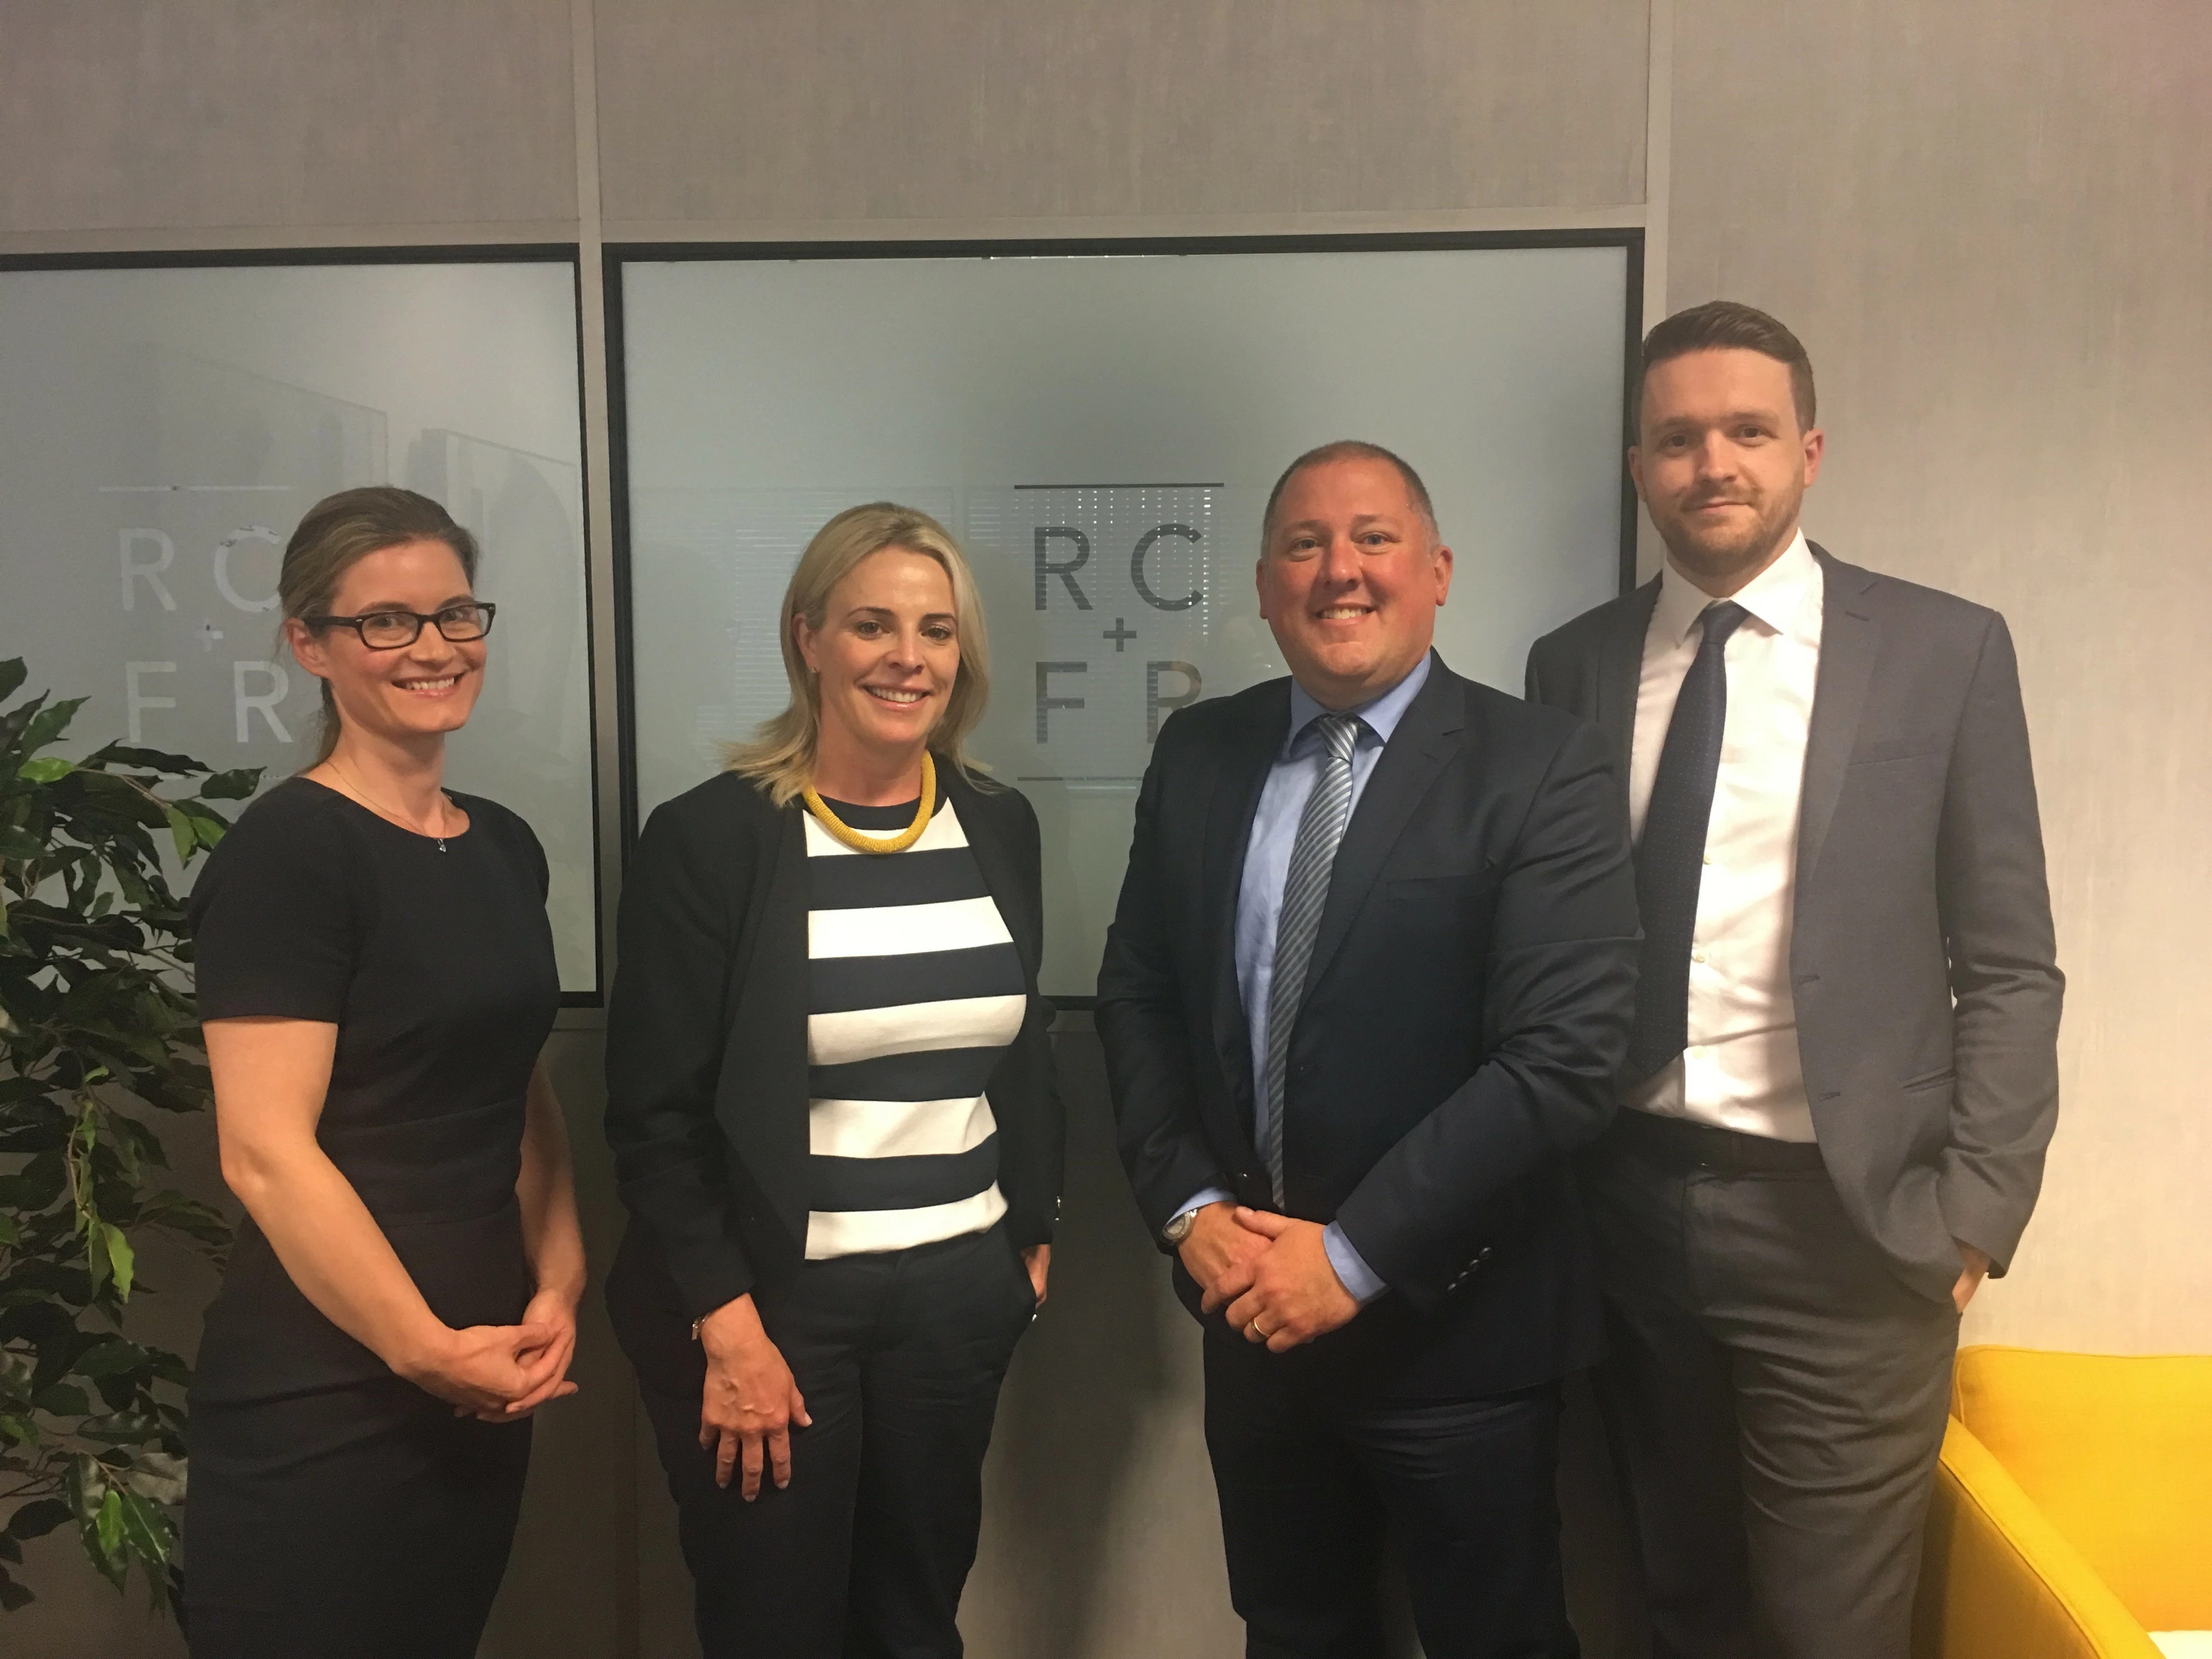 From left to right -  Amy Knowles (Associate Director at RCFR) Sarah Rotheram (Director at RCFR) Paul Cooney (Managing Director at Zodeq) and Jack Osborne (Relationship Manager at Zodeq). 